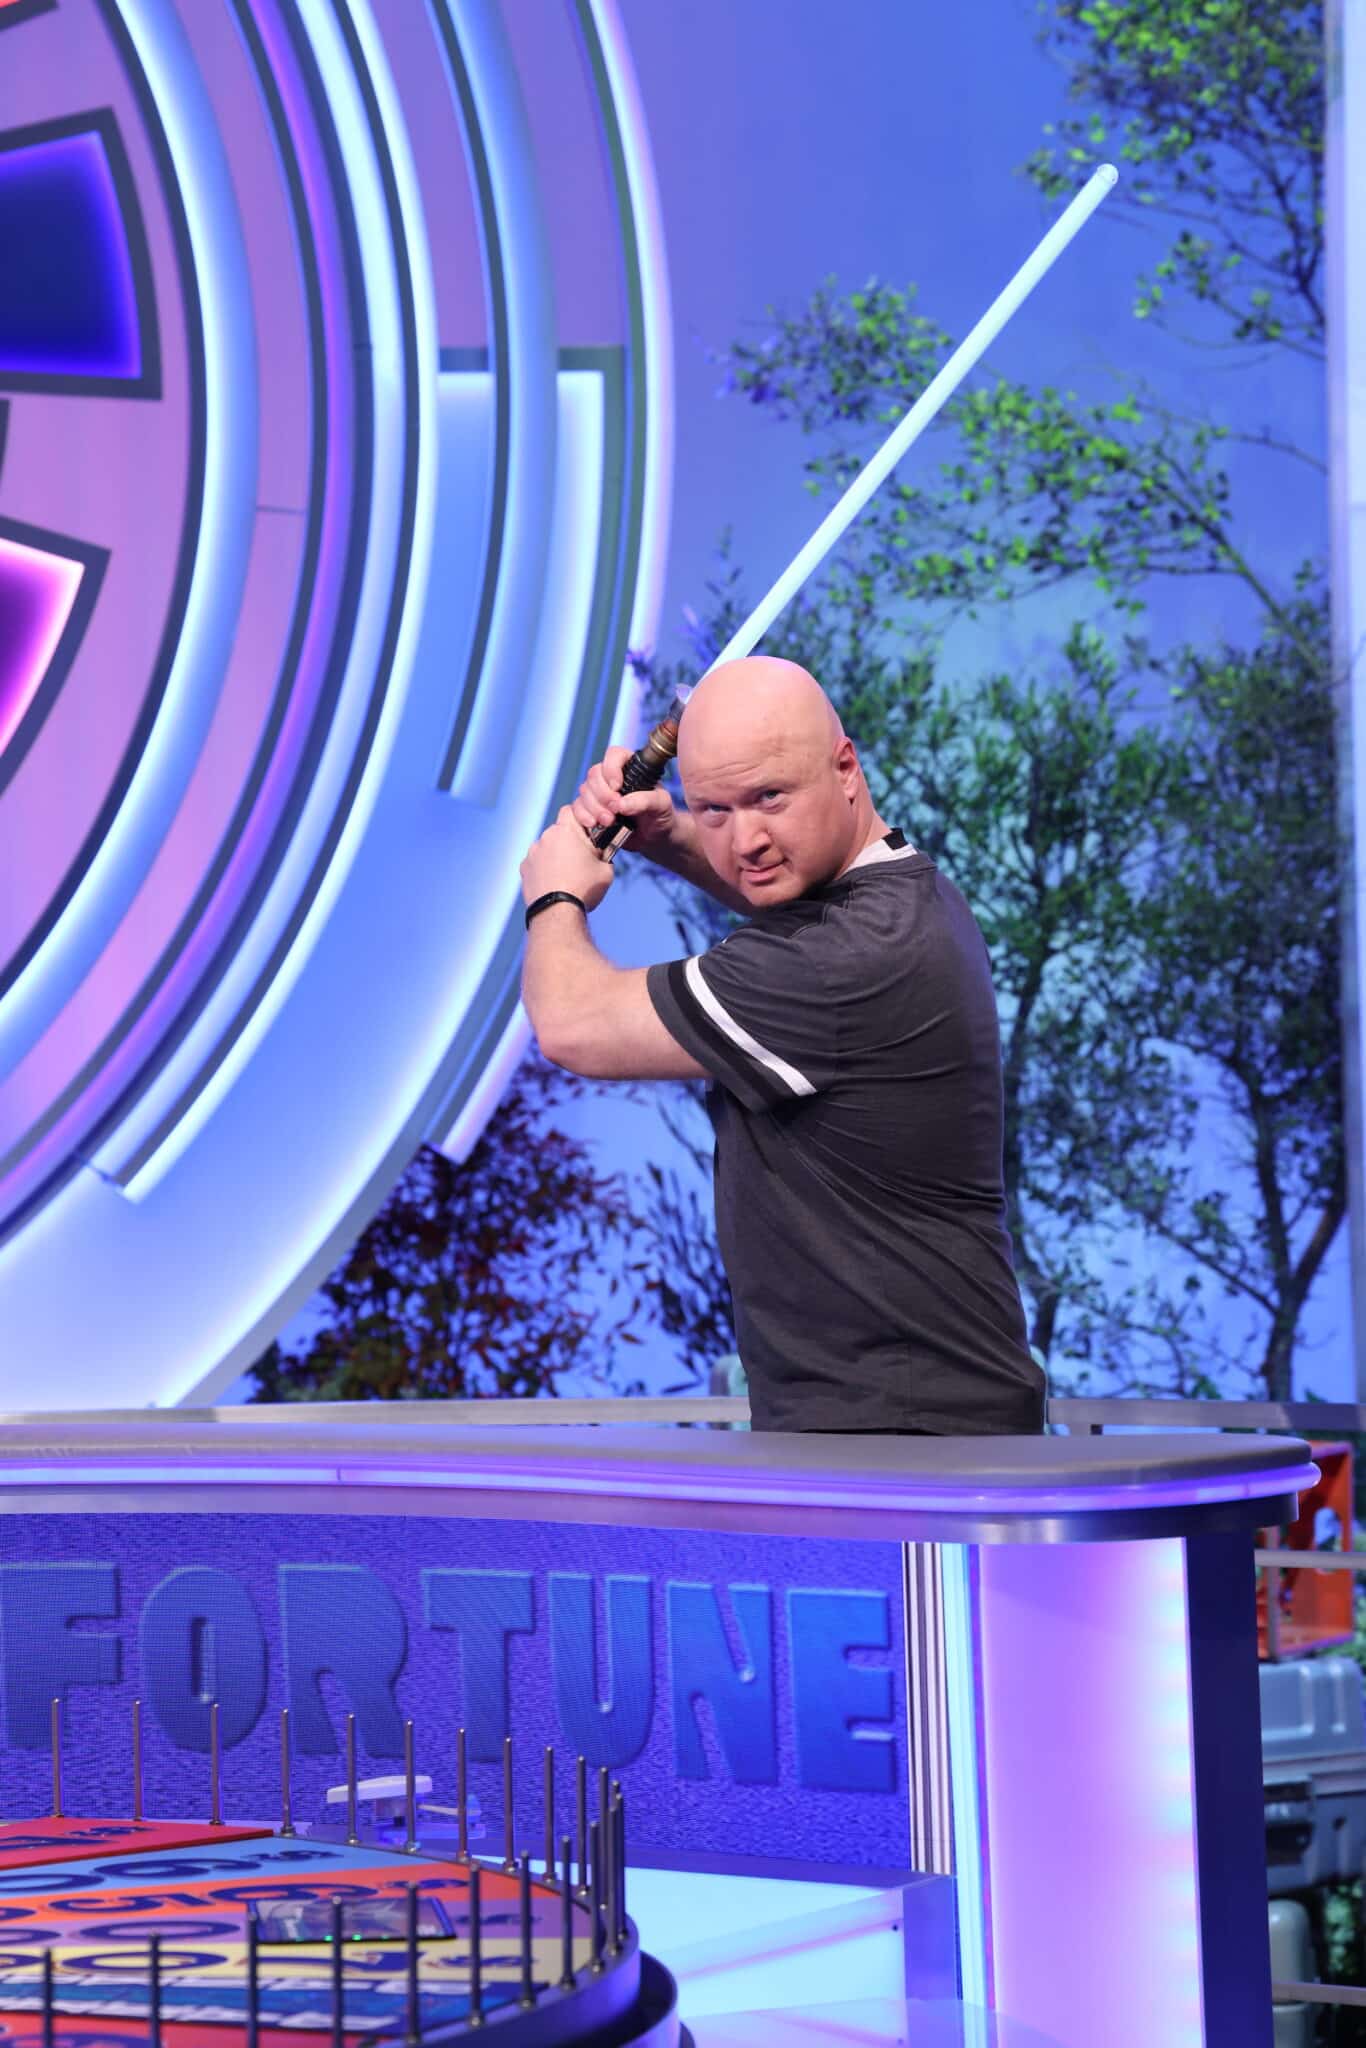 Area man to appear on Wheel of Fortune Star Wars edition on Monday